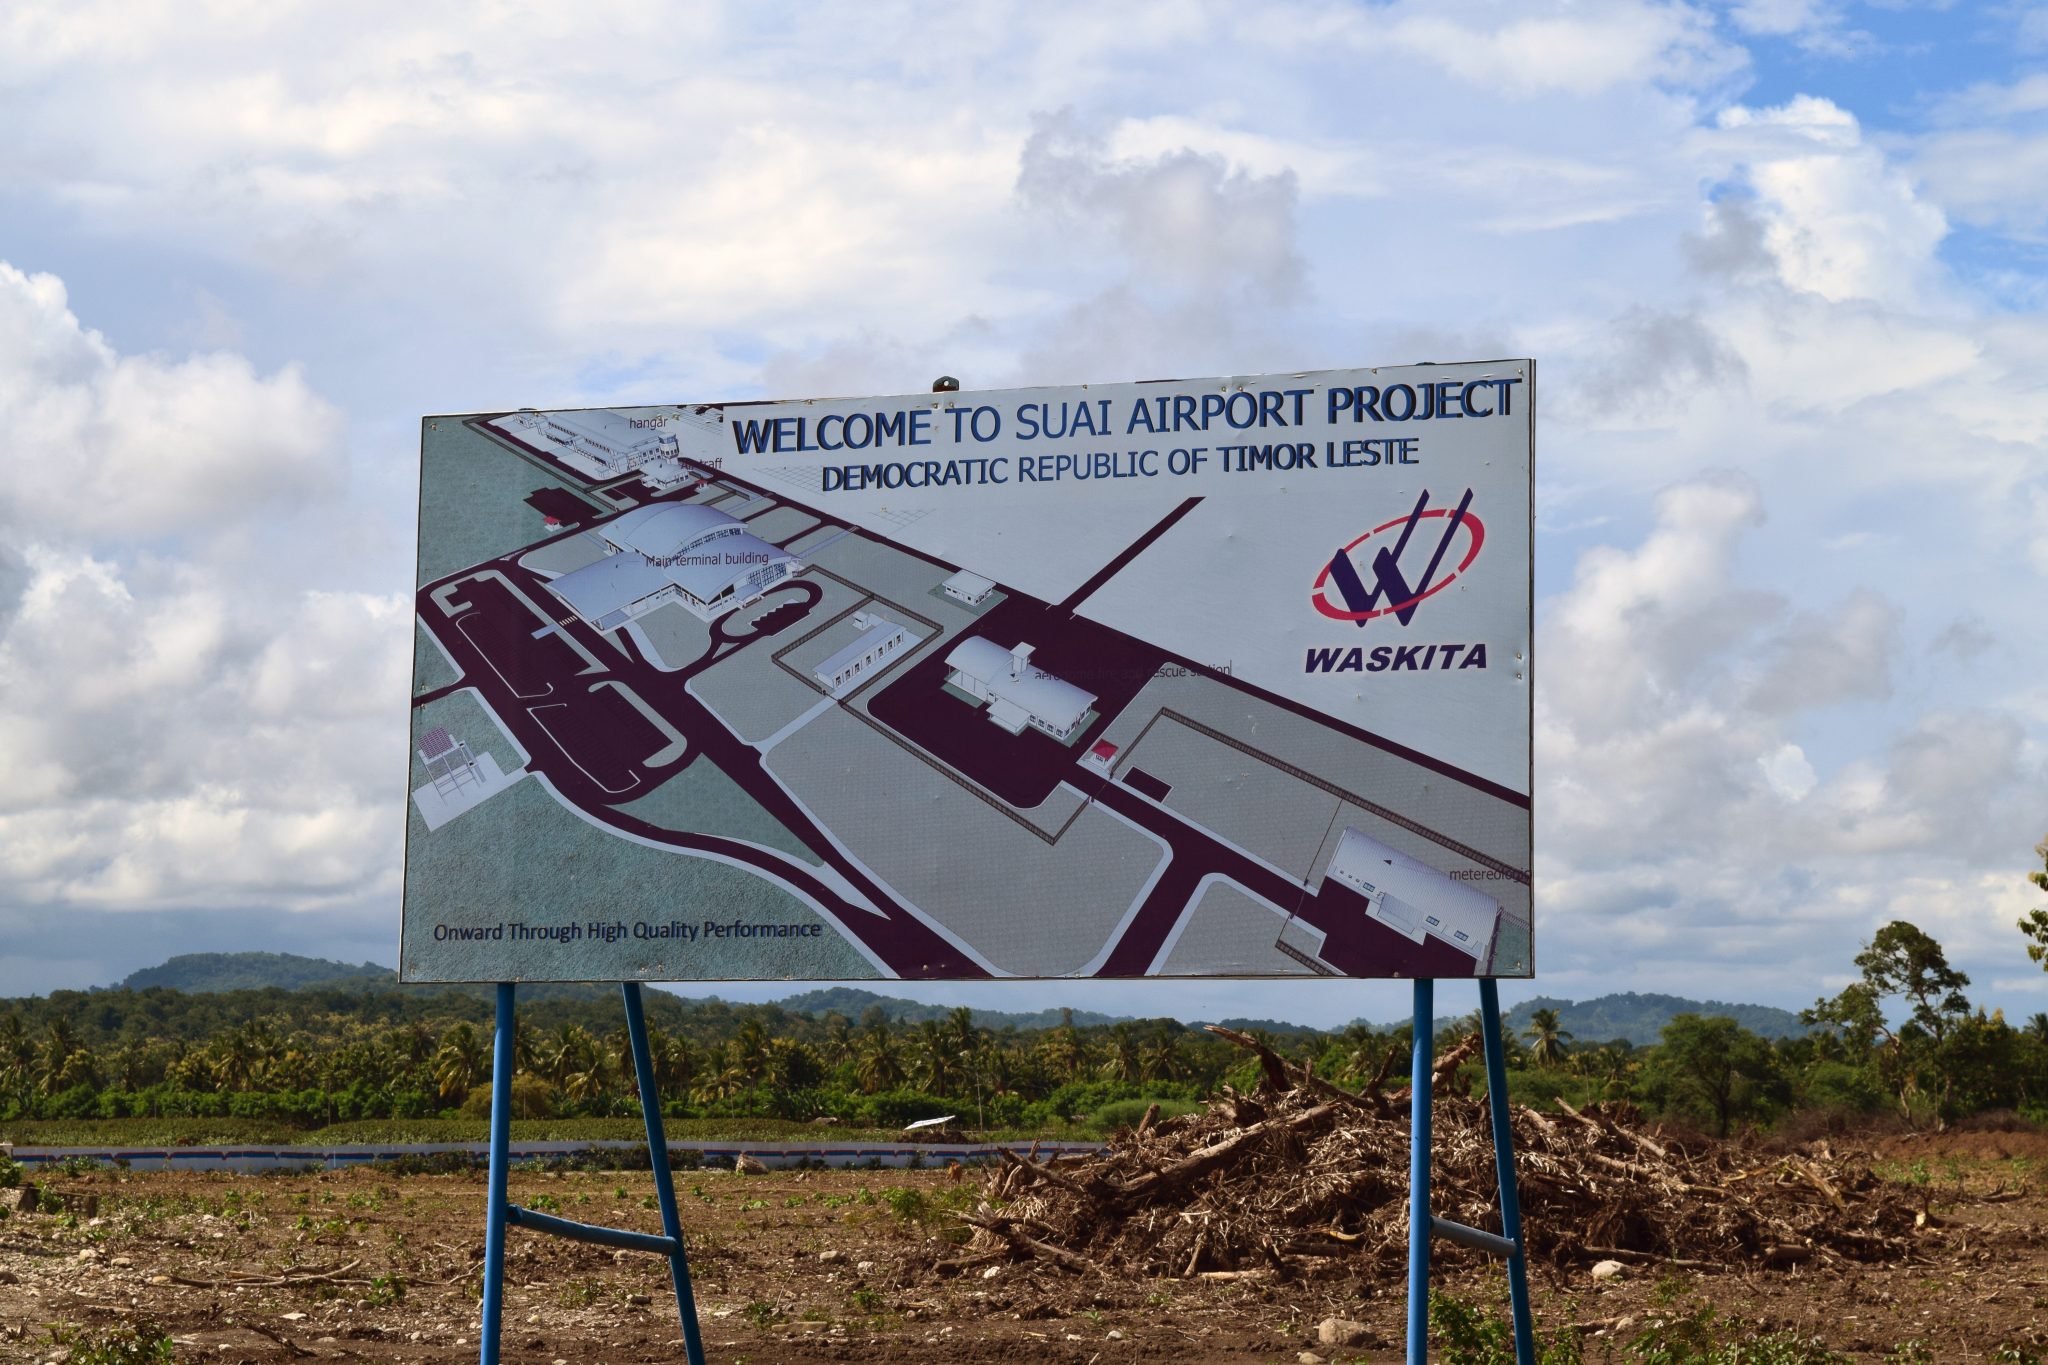 Welcome to Suai Airport Project sign